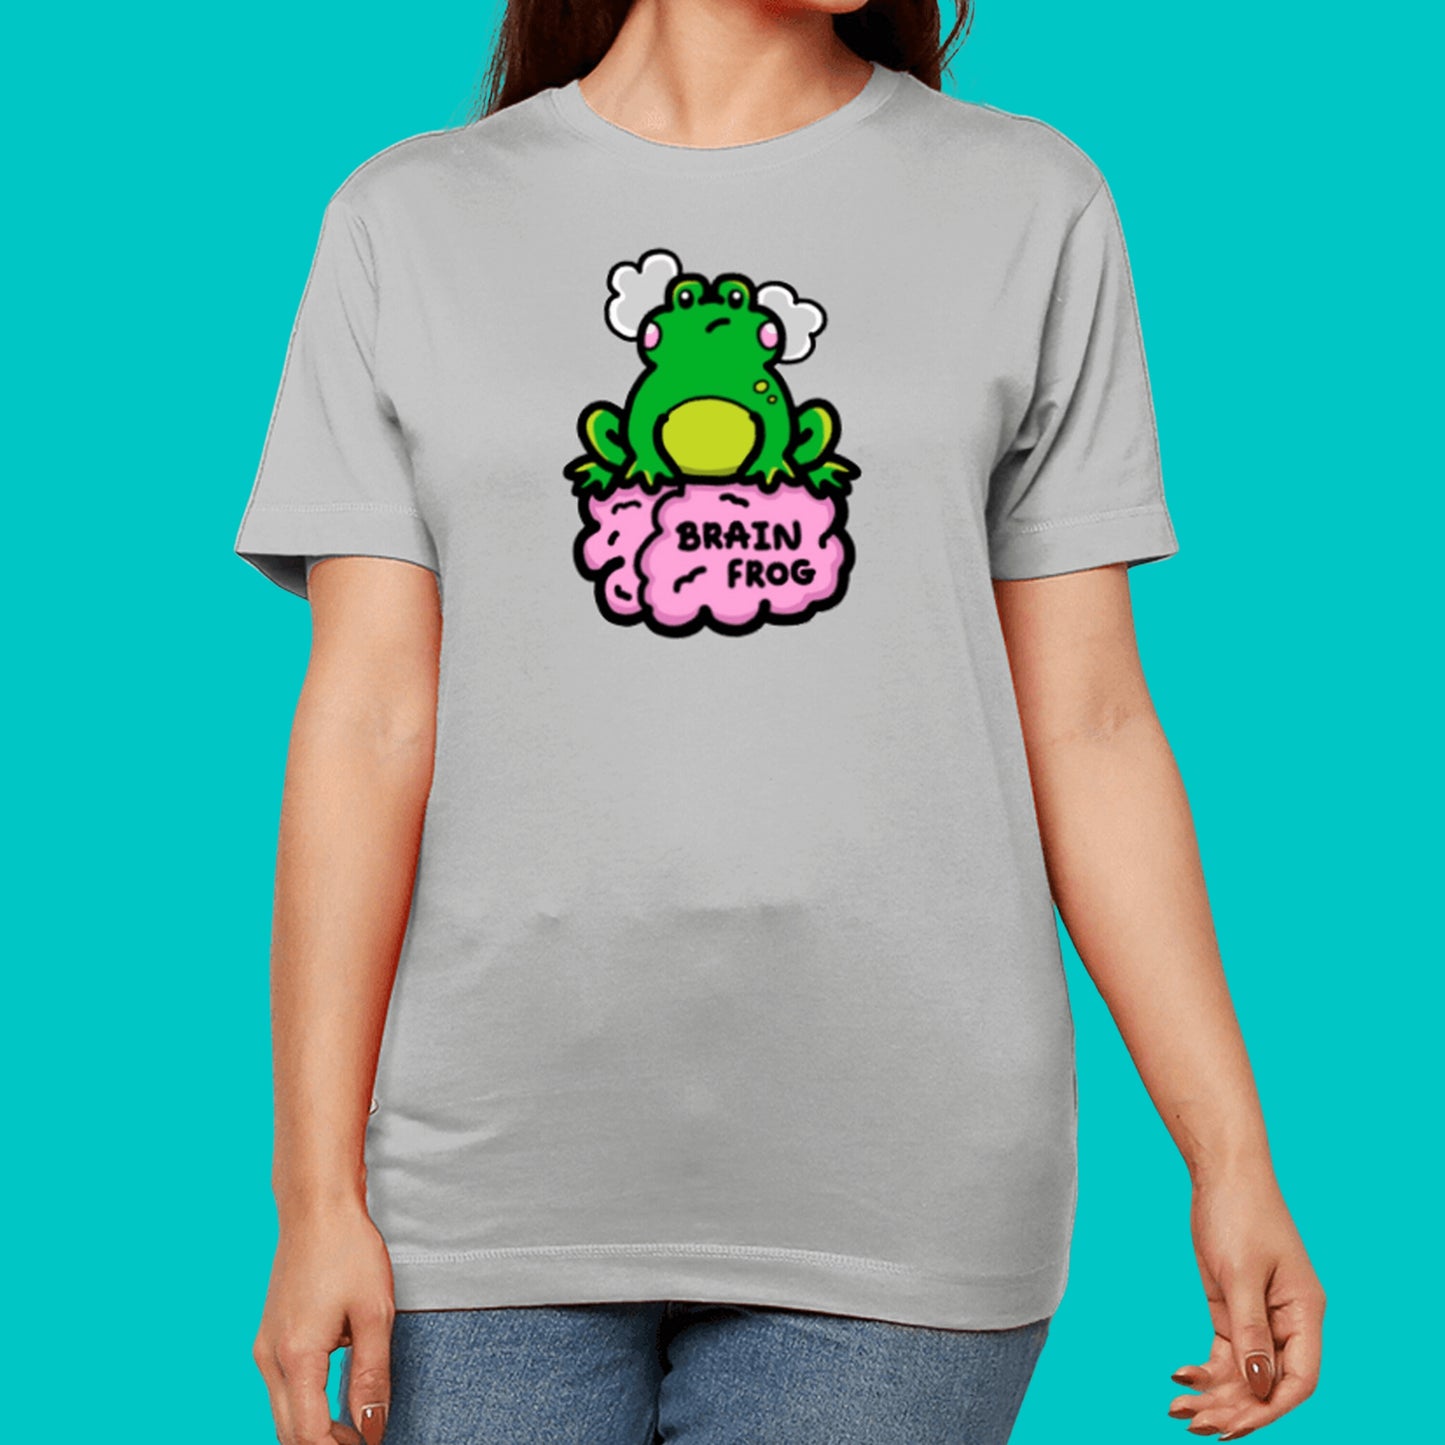 The Brain Frog T-shirt - Brain Fog in grey shown on a model posing facing forward with both hand resting by their side, photo is cropped from the chin to hips. The print is a confused frog with pink blush cheeks and two grey clouds above its head. Its sat on a pink brain with text that reads Brain Frog. The design was created to raise awareness for brain fog.